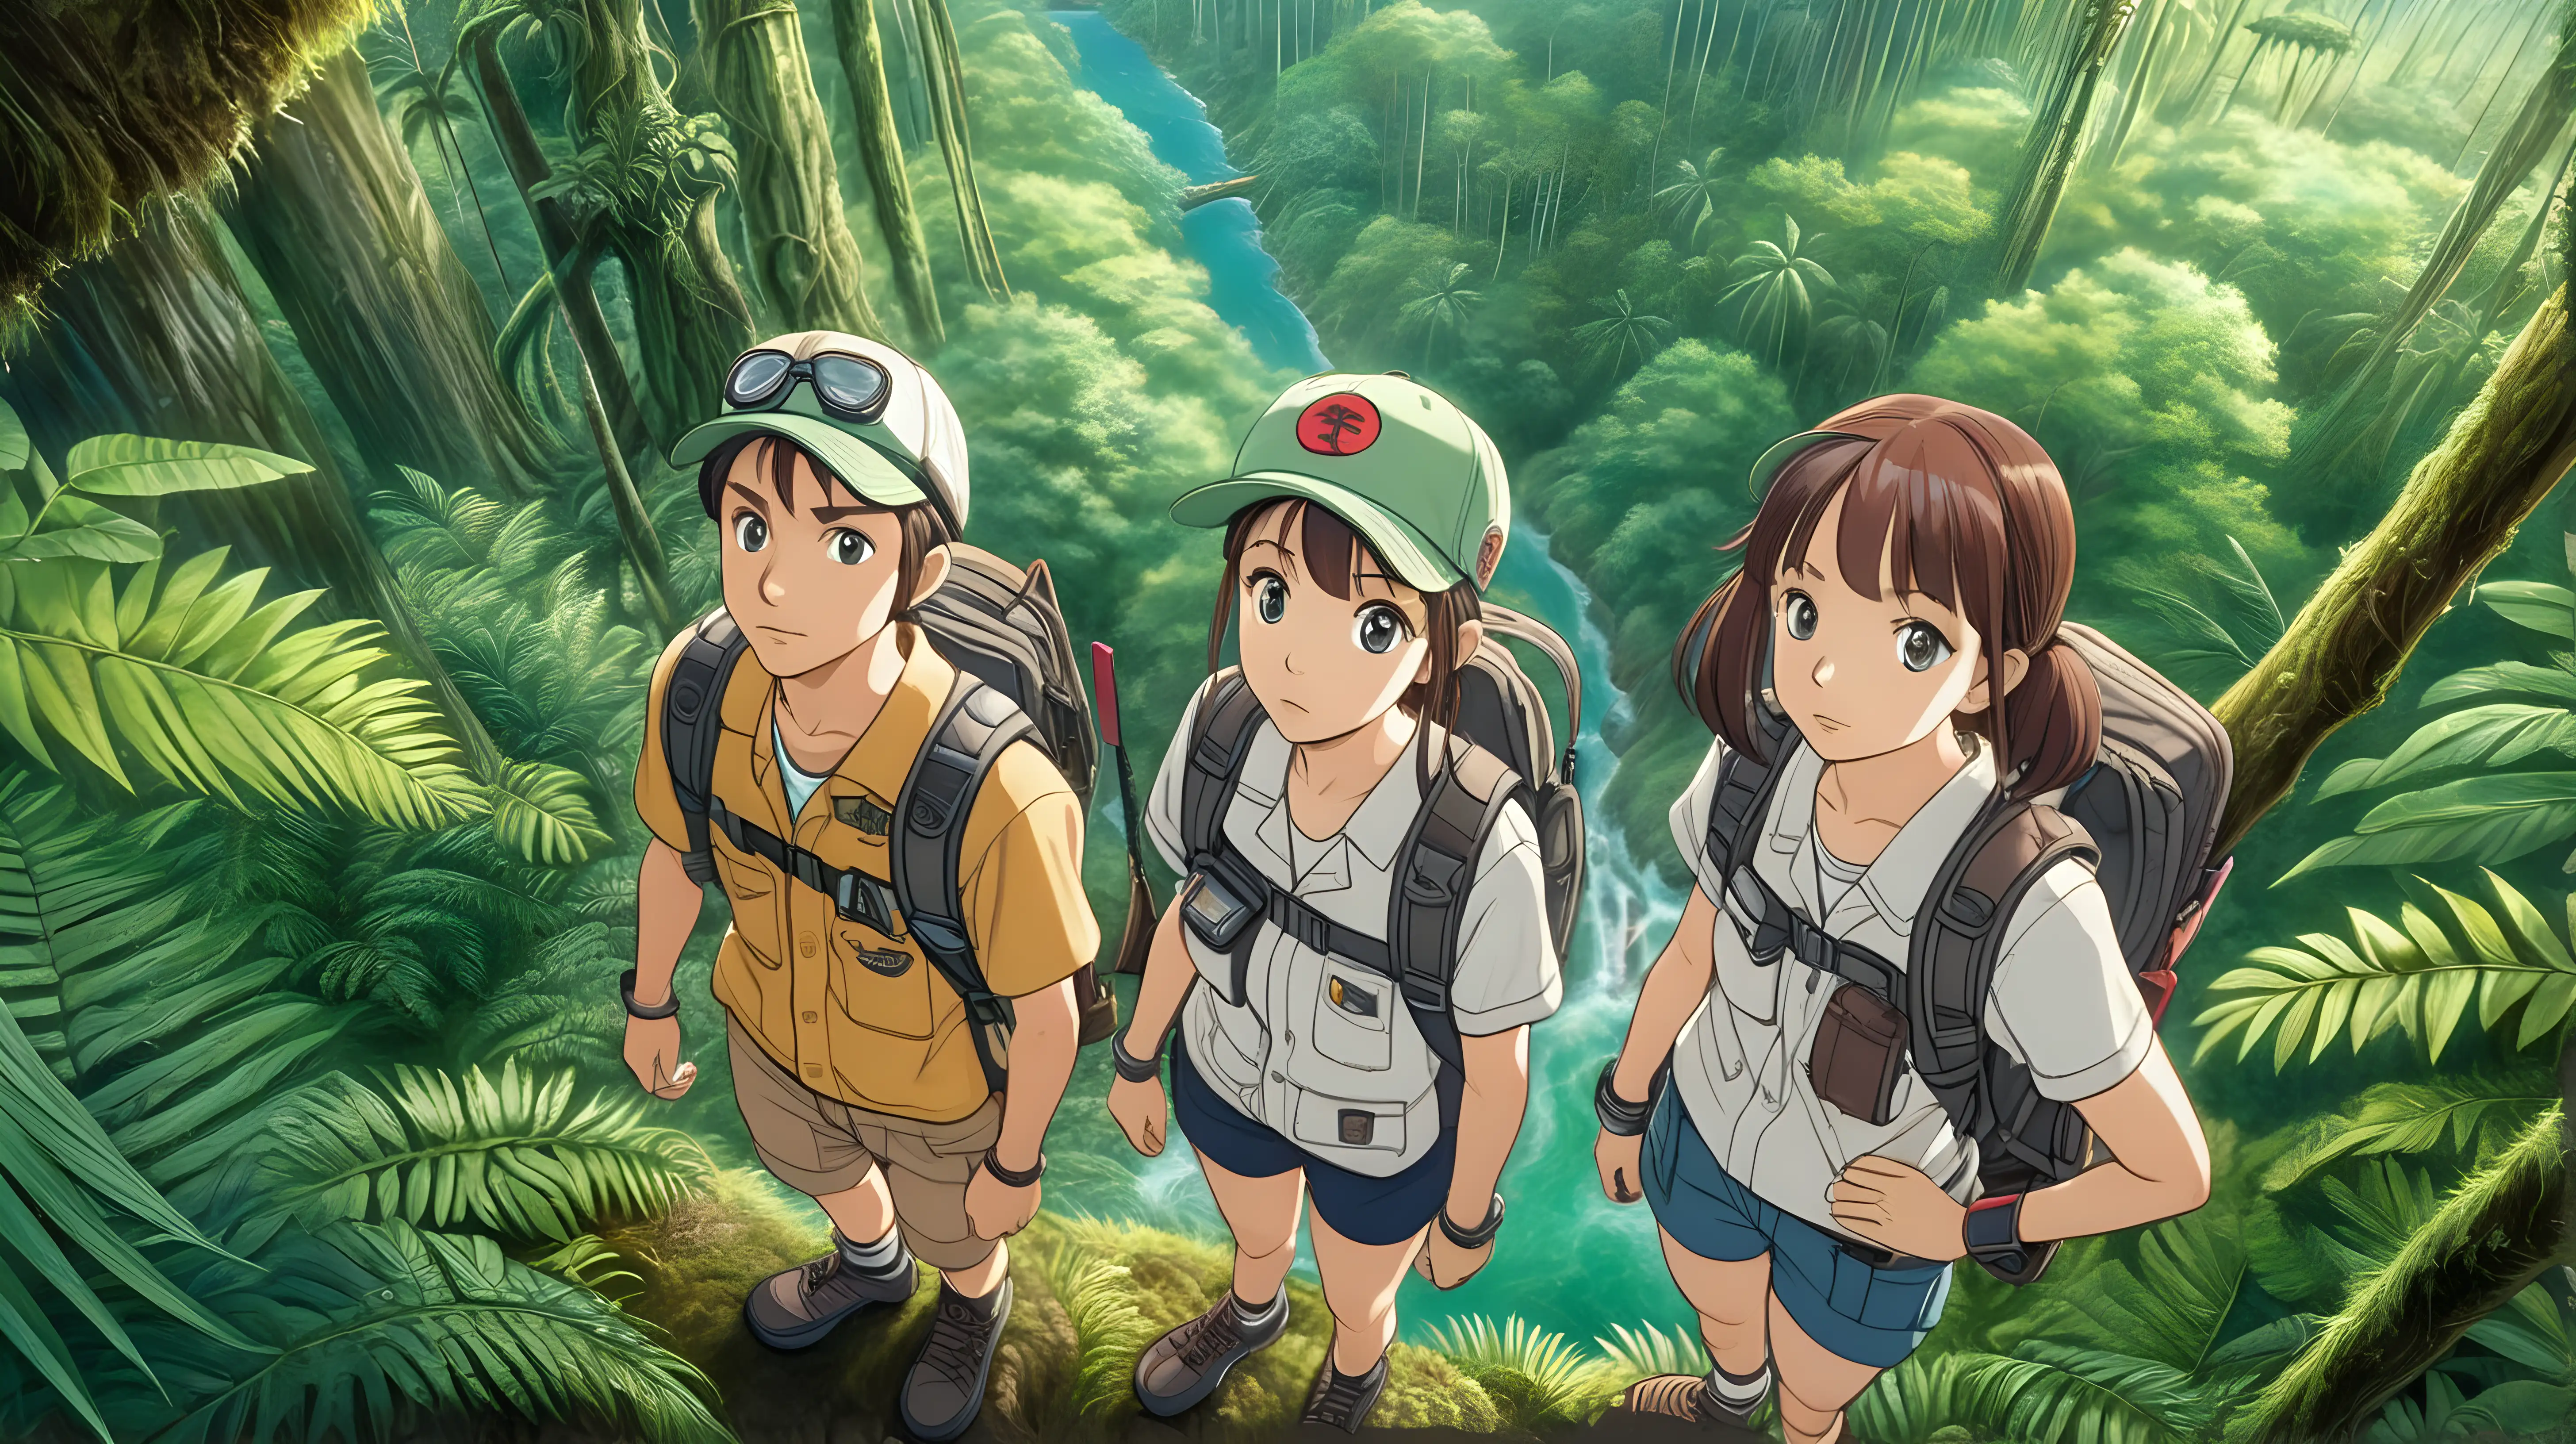 Japanese Anime Inspired Aerial Shot of Male and Female Explorers in Rainforest